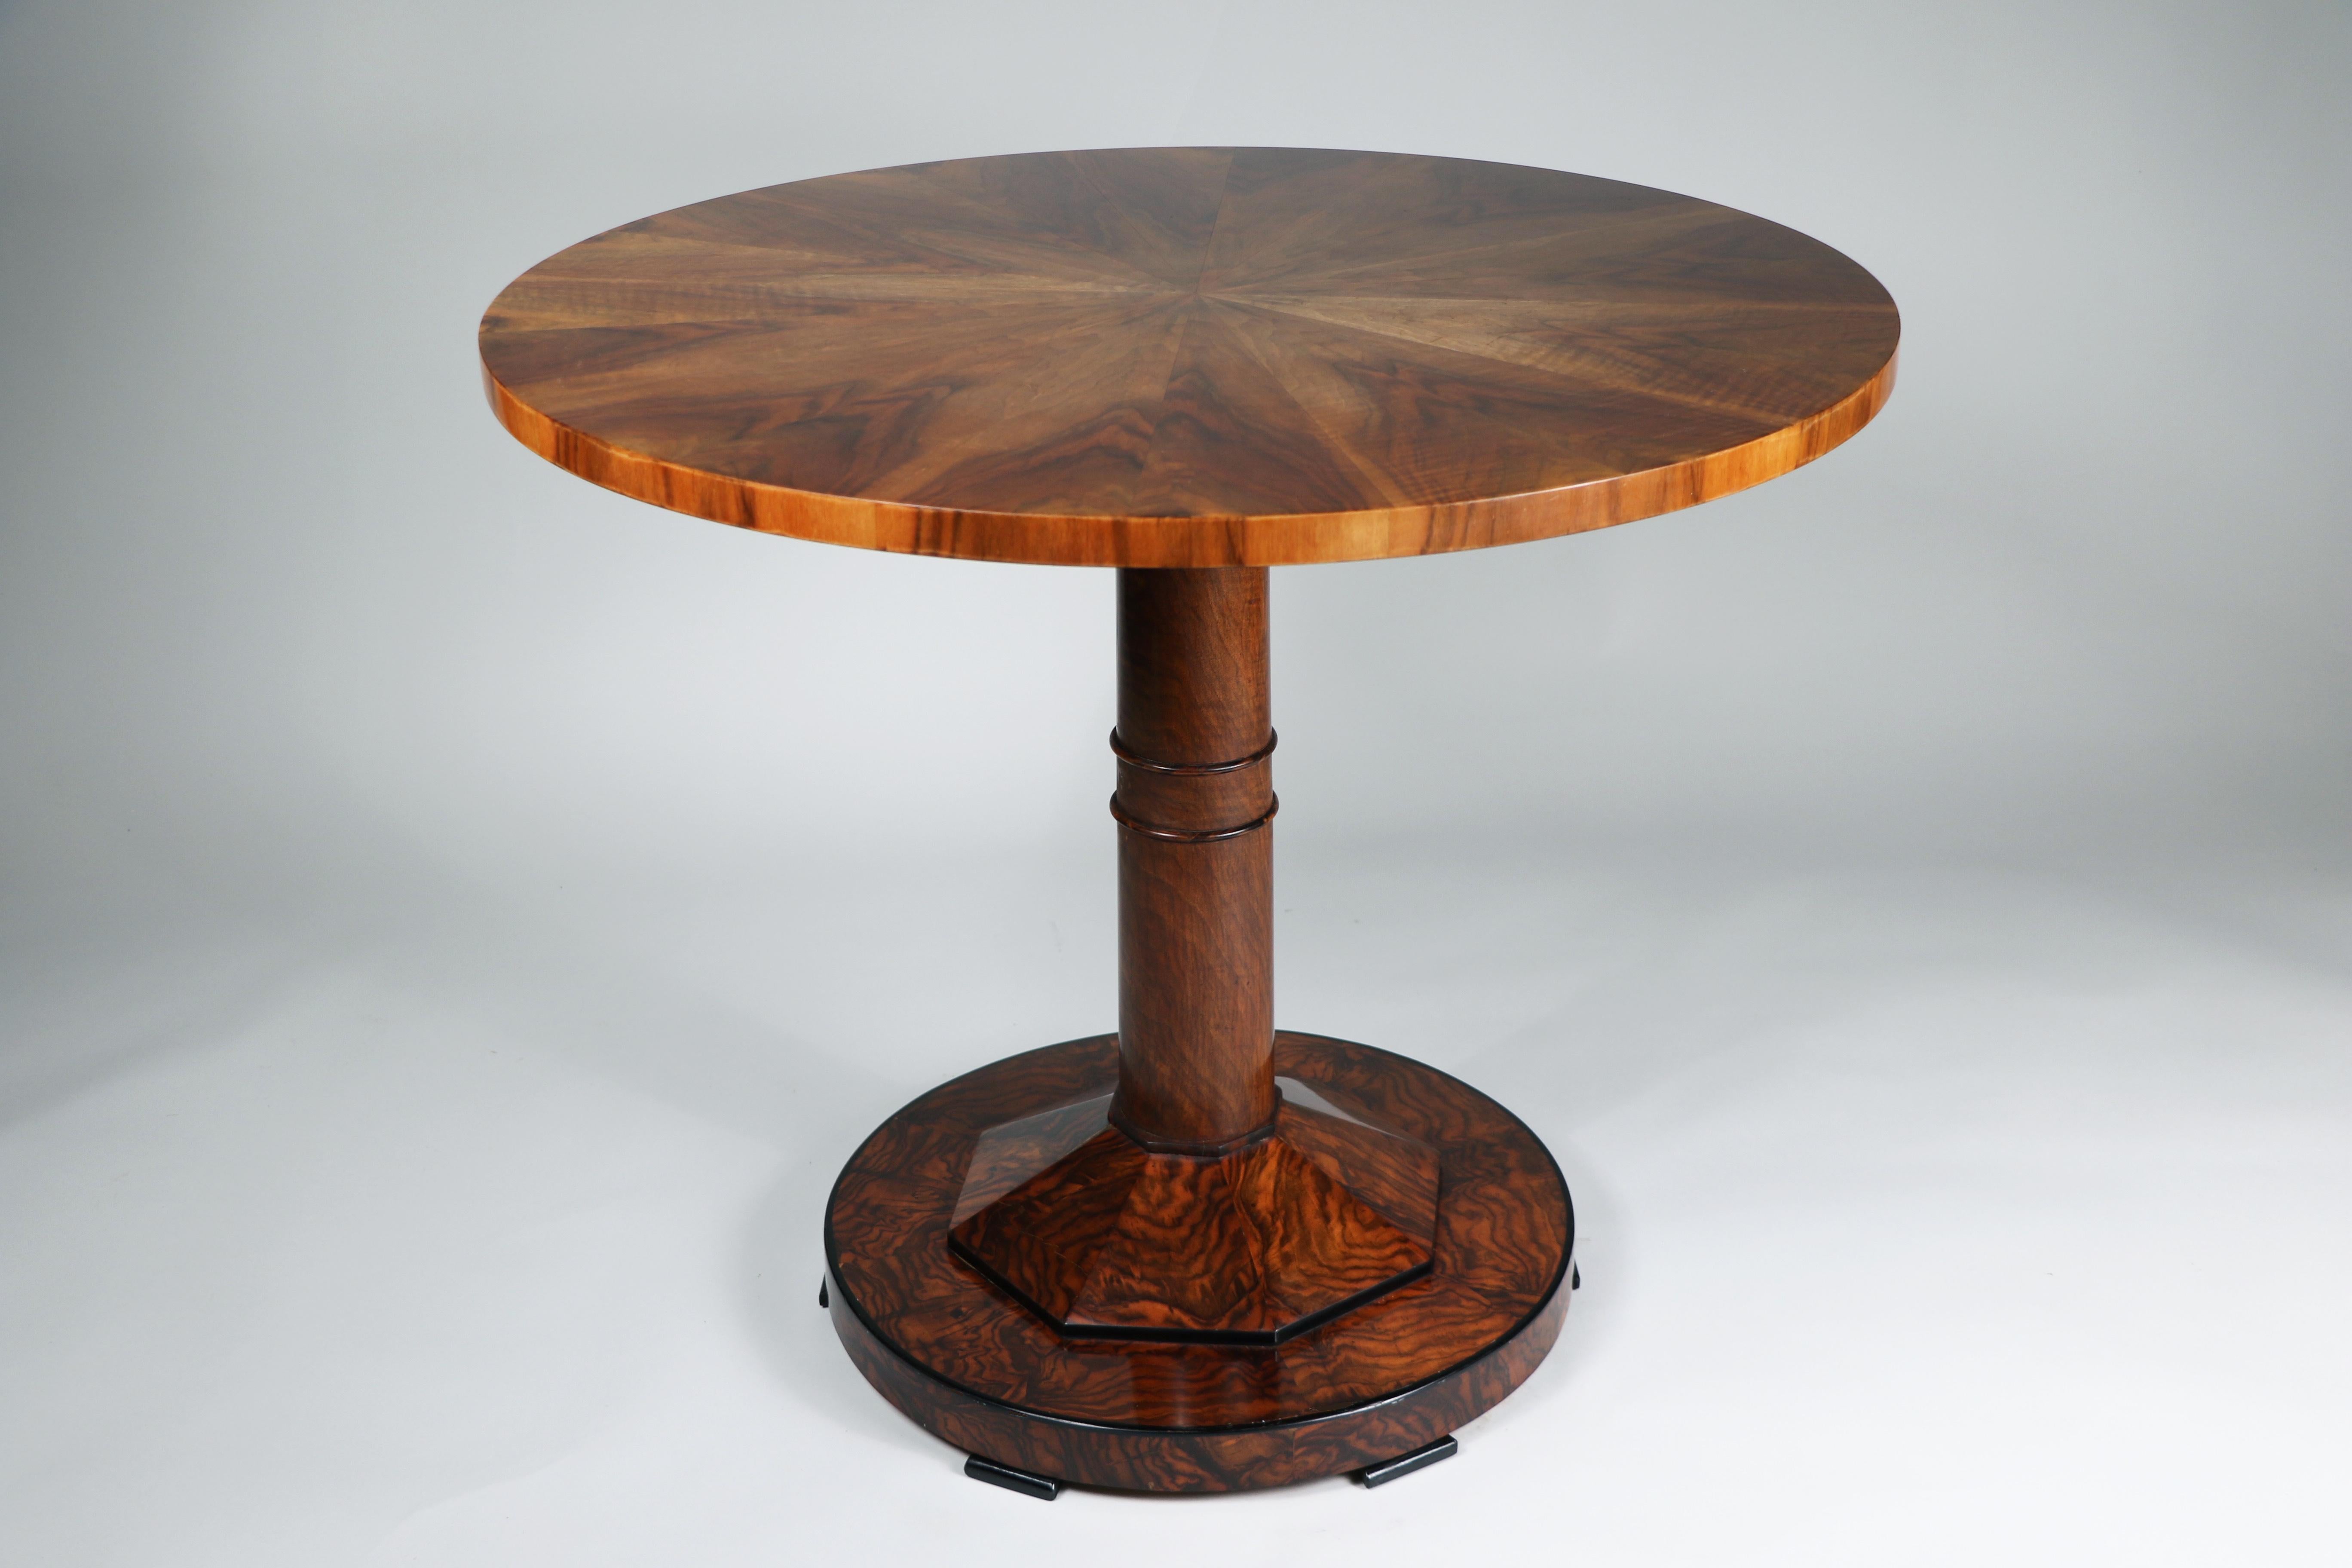 Hello,
This elegant Biedermeier walnut pedestal table is the best example of high quality Viennese piece from circa 1825.

Viennese Biedermeier is distinguished by their sophisticated proportions, rare and refined design and excellent craftsmanship